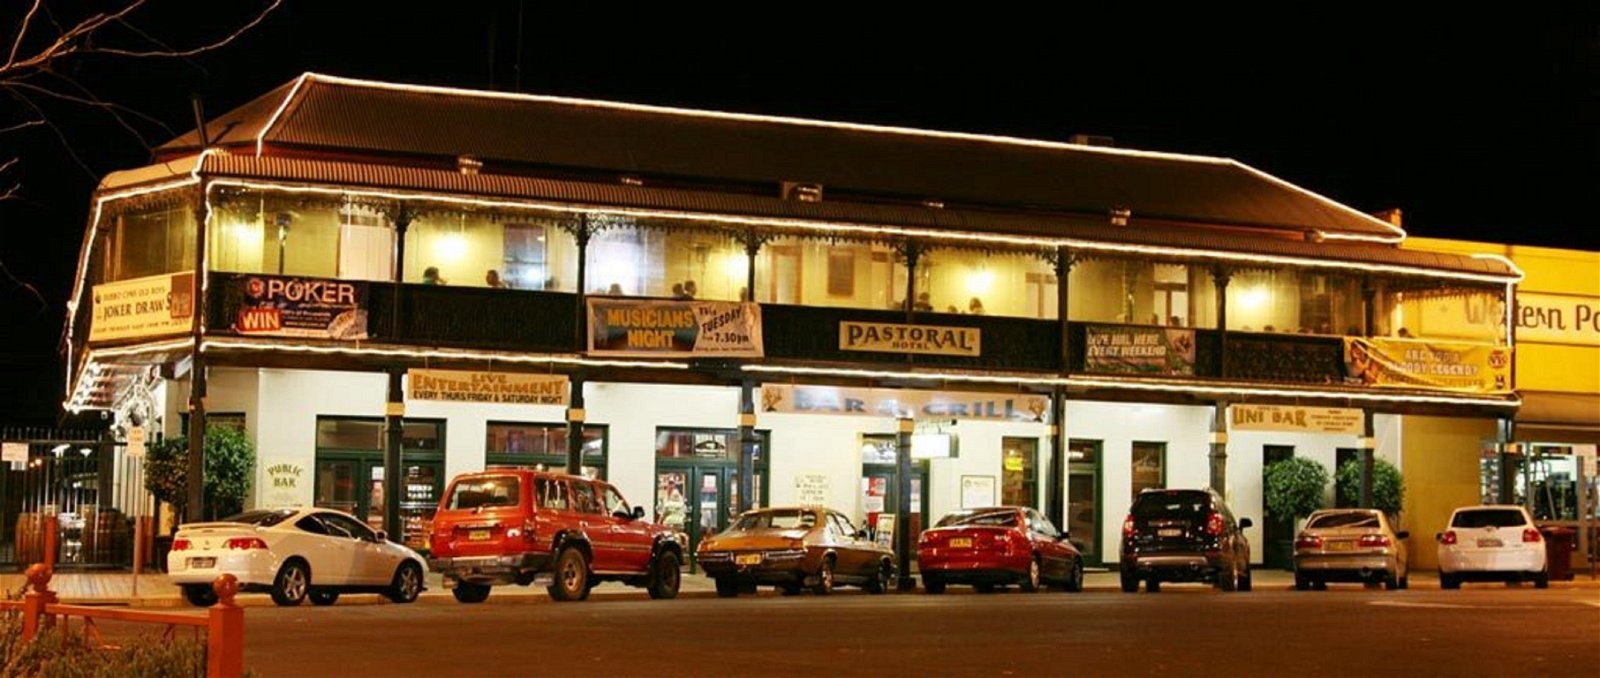 The Pastoral Hotel - Temporarily Closed - Northern Rivers Accommodation